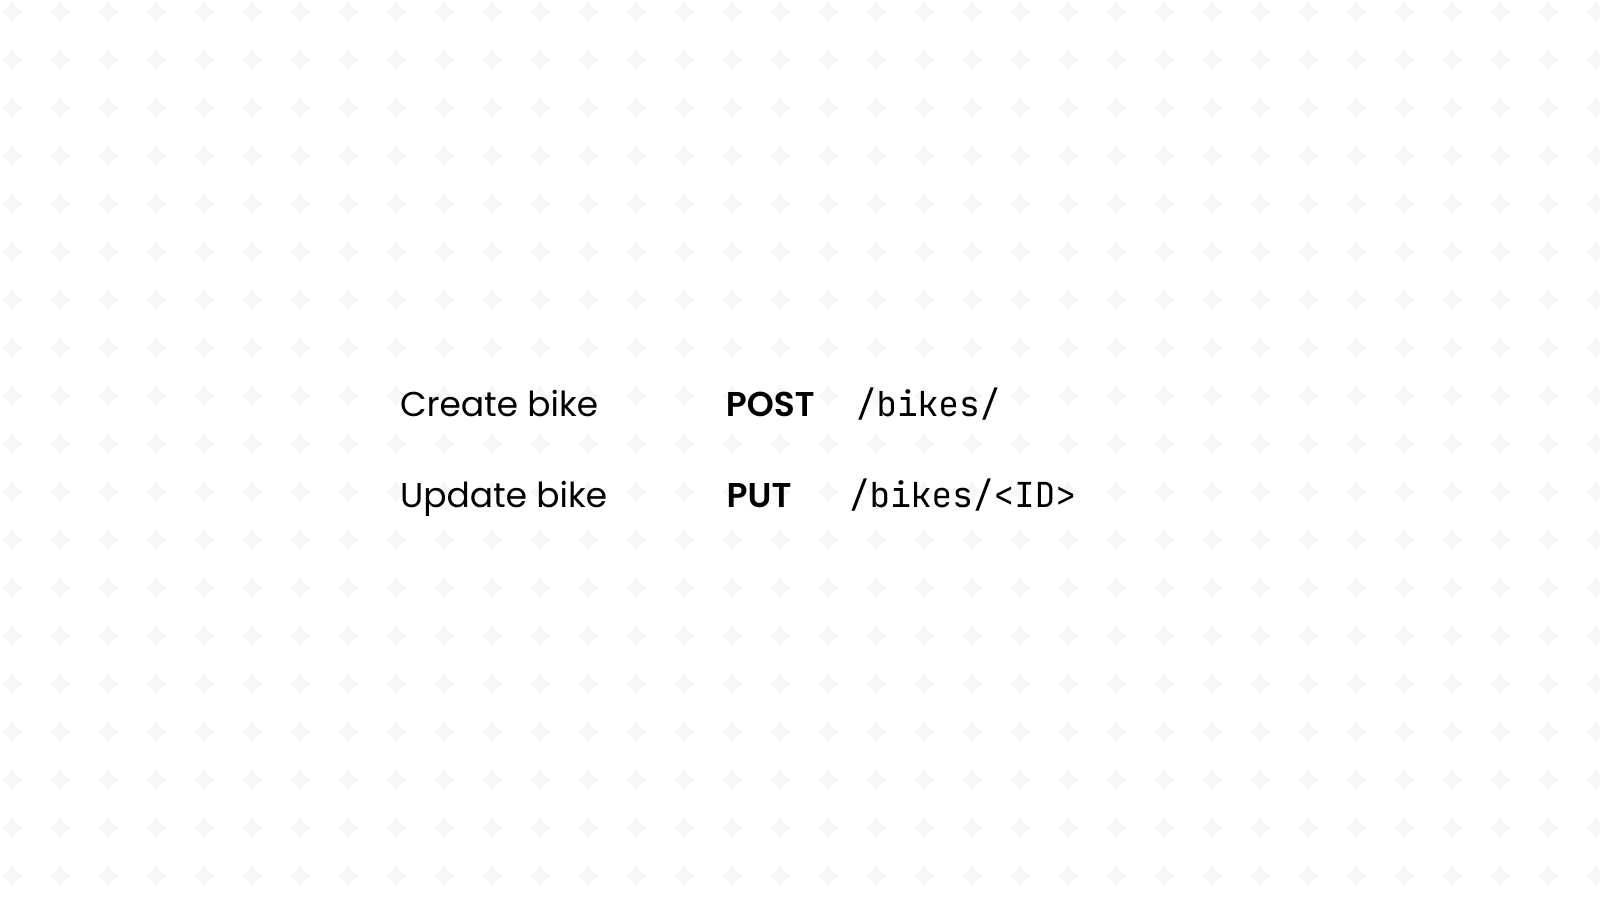 Two HTTP routes: create bike and update bike.